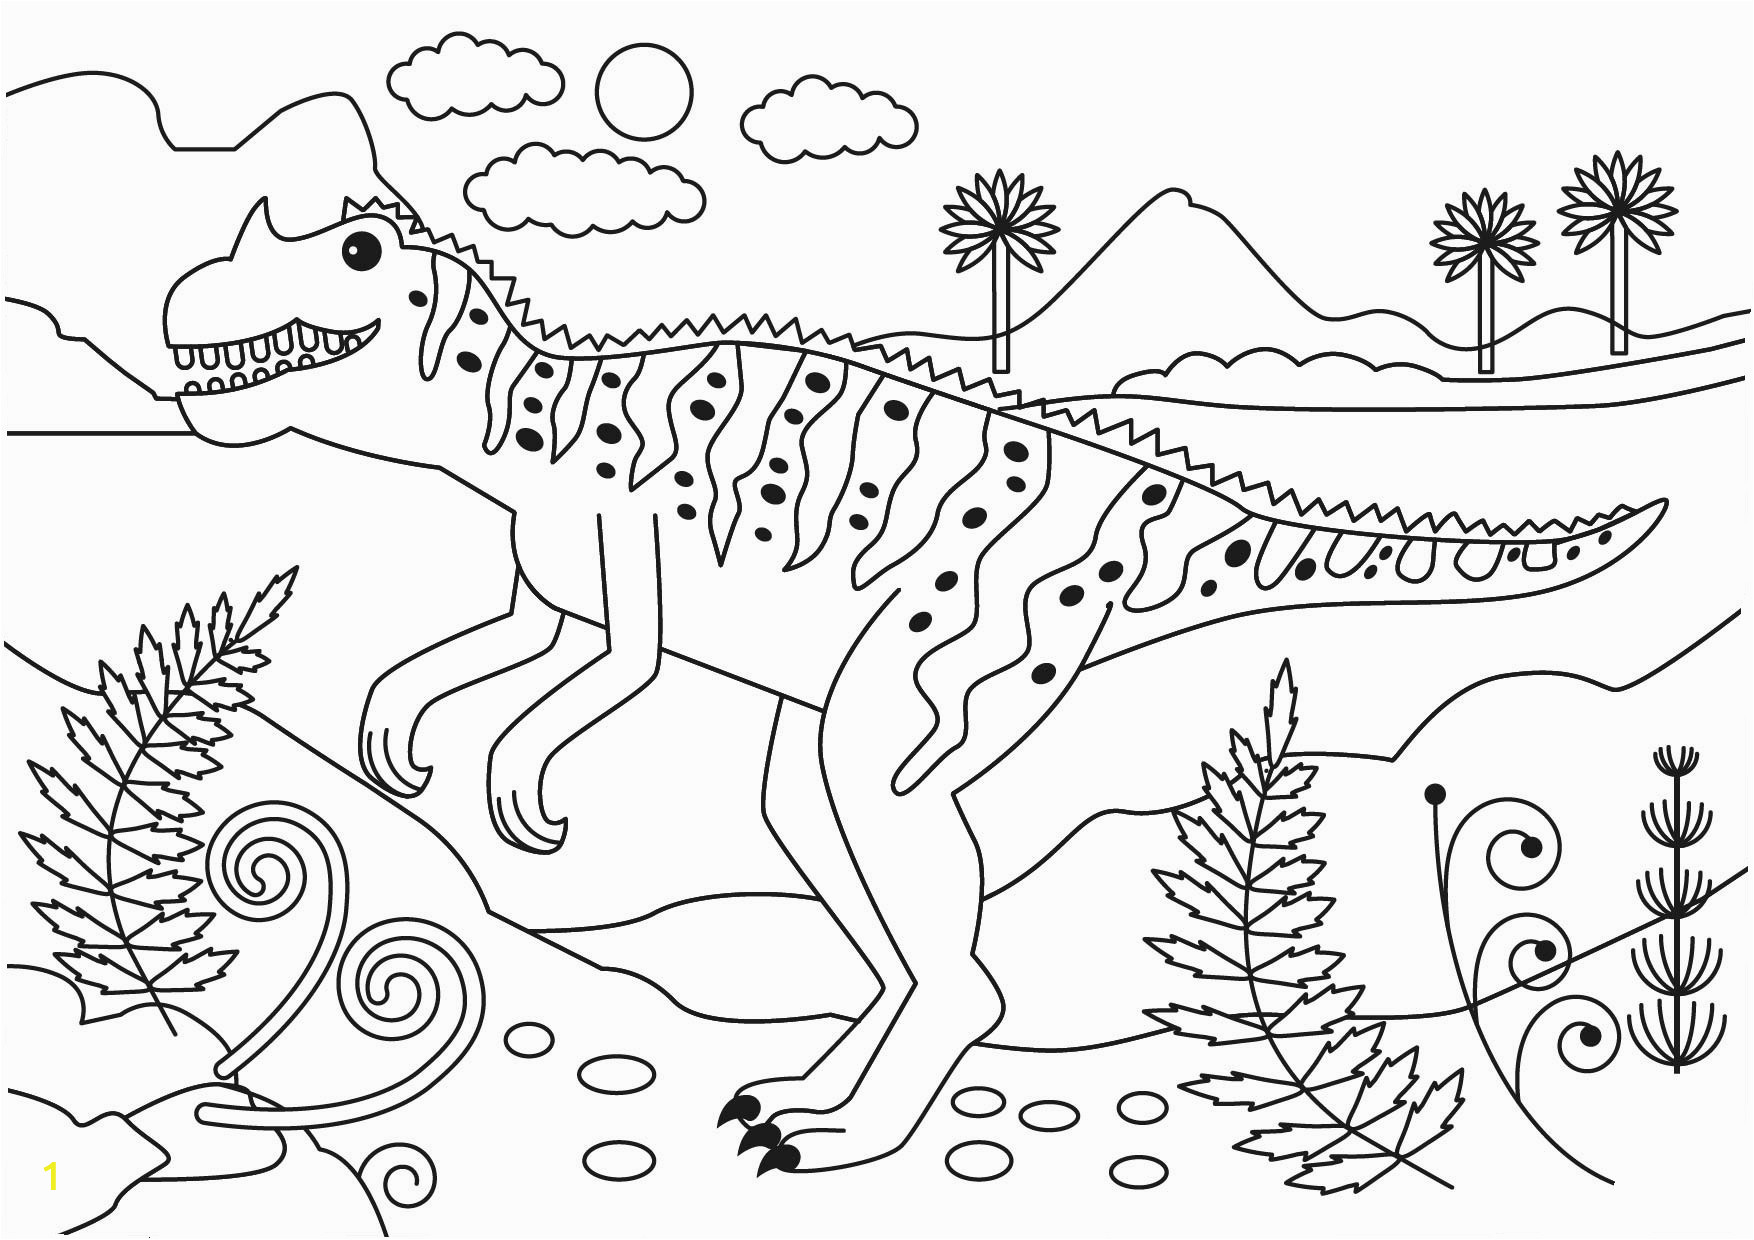 simple dinosaur coloring pages best of coloring page free printable ceratosaurus of simple dinosaur coloring pages